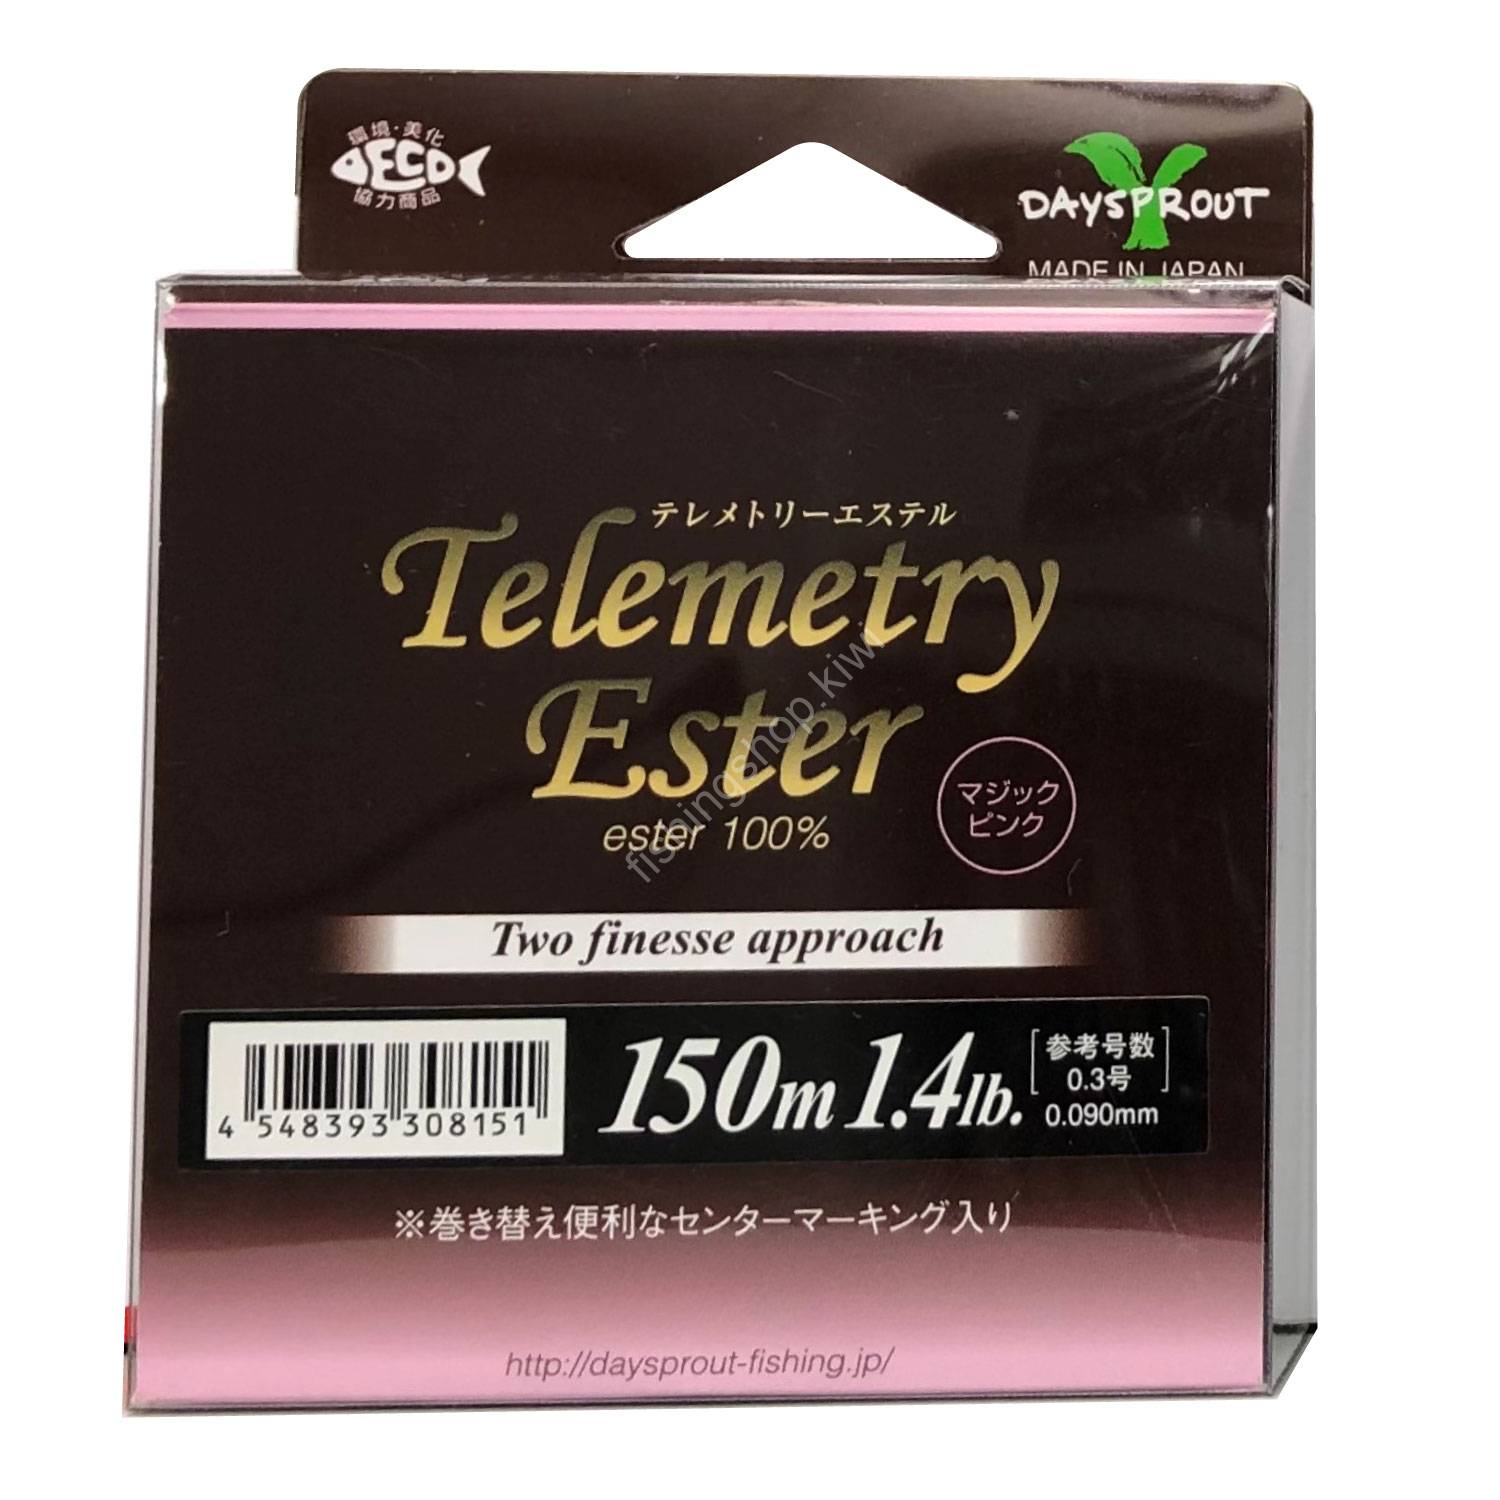 DAYSPROUT Telemetry Ester Magic Pink 150m 2lb #0.4 Fishing lines buy at